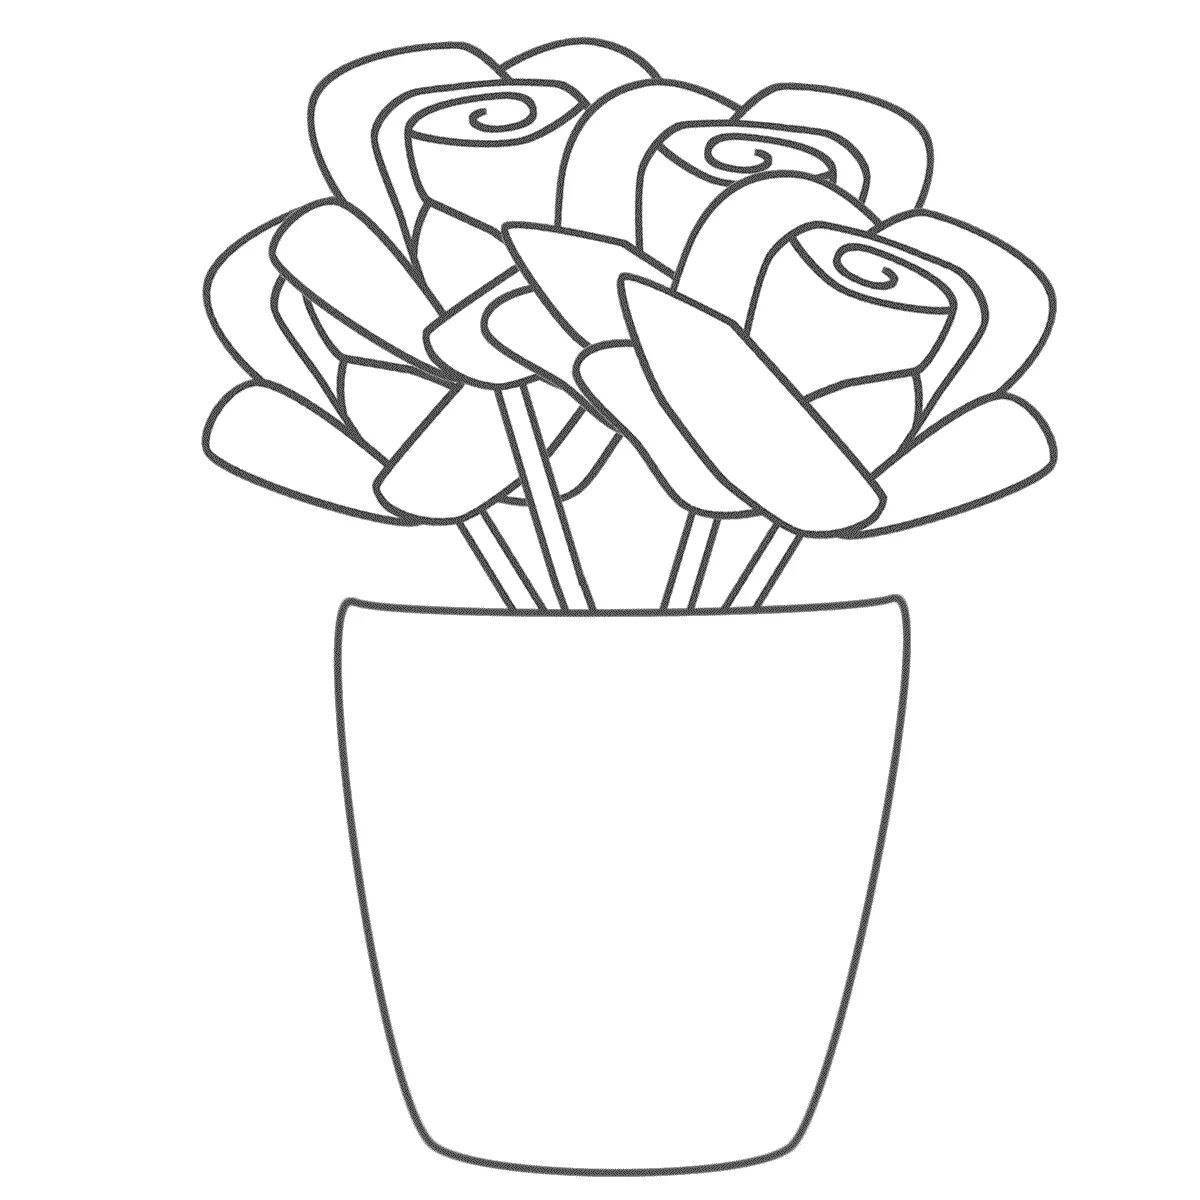 Dazzling vase of flowers coloring book for children